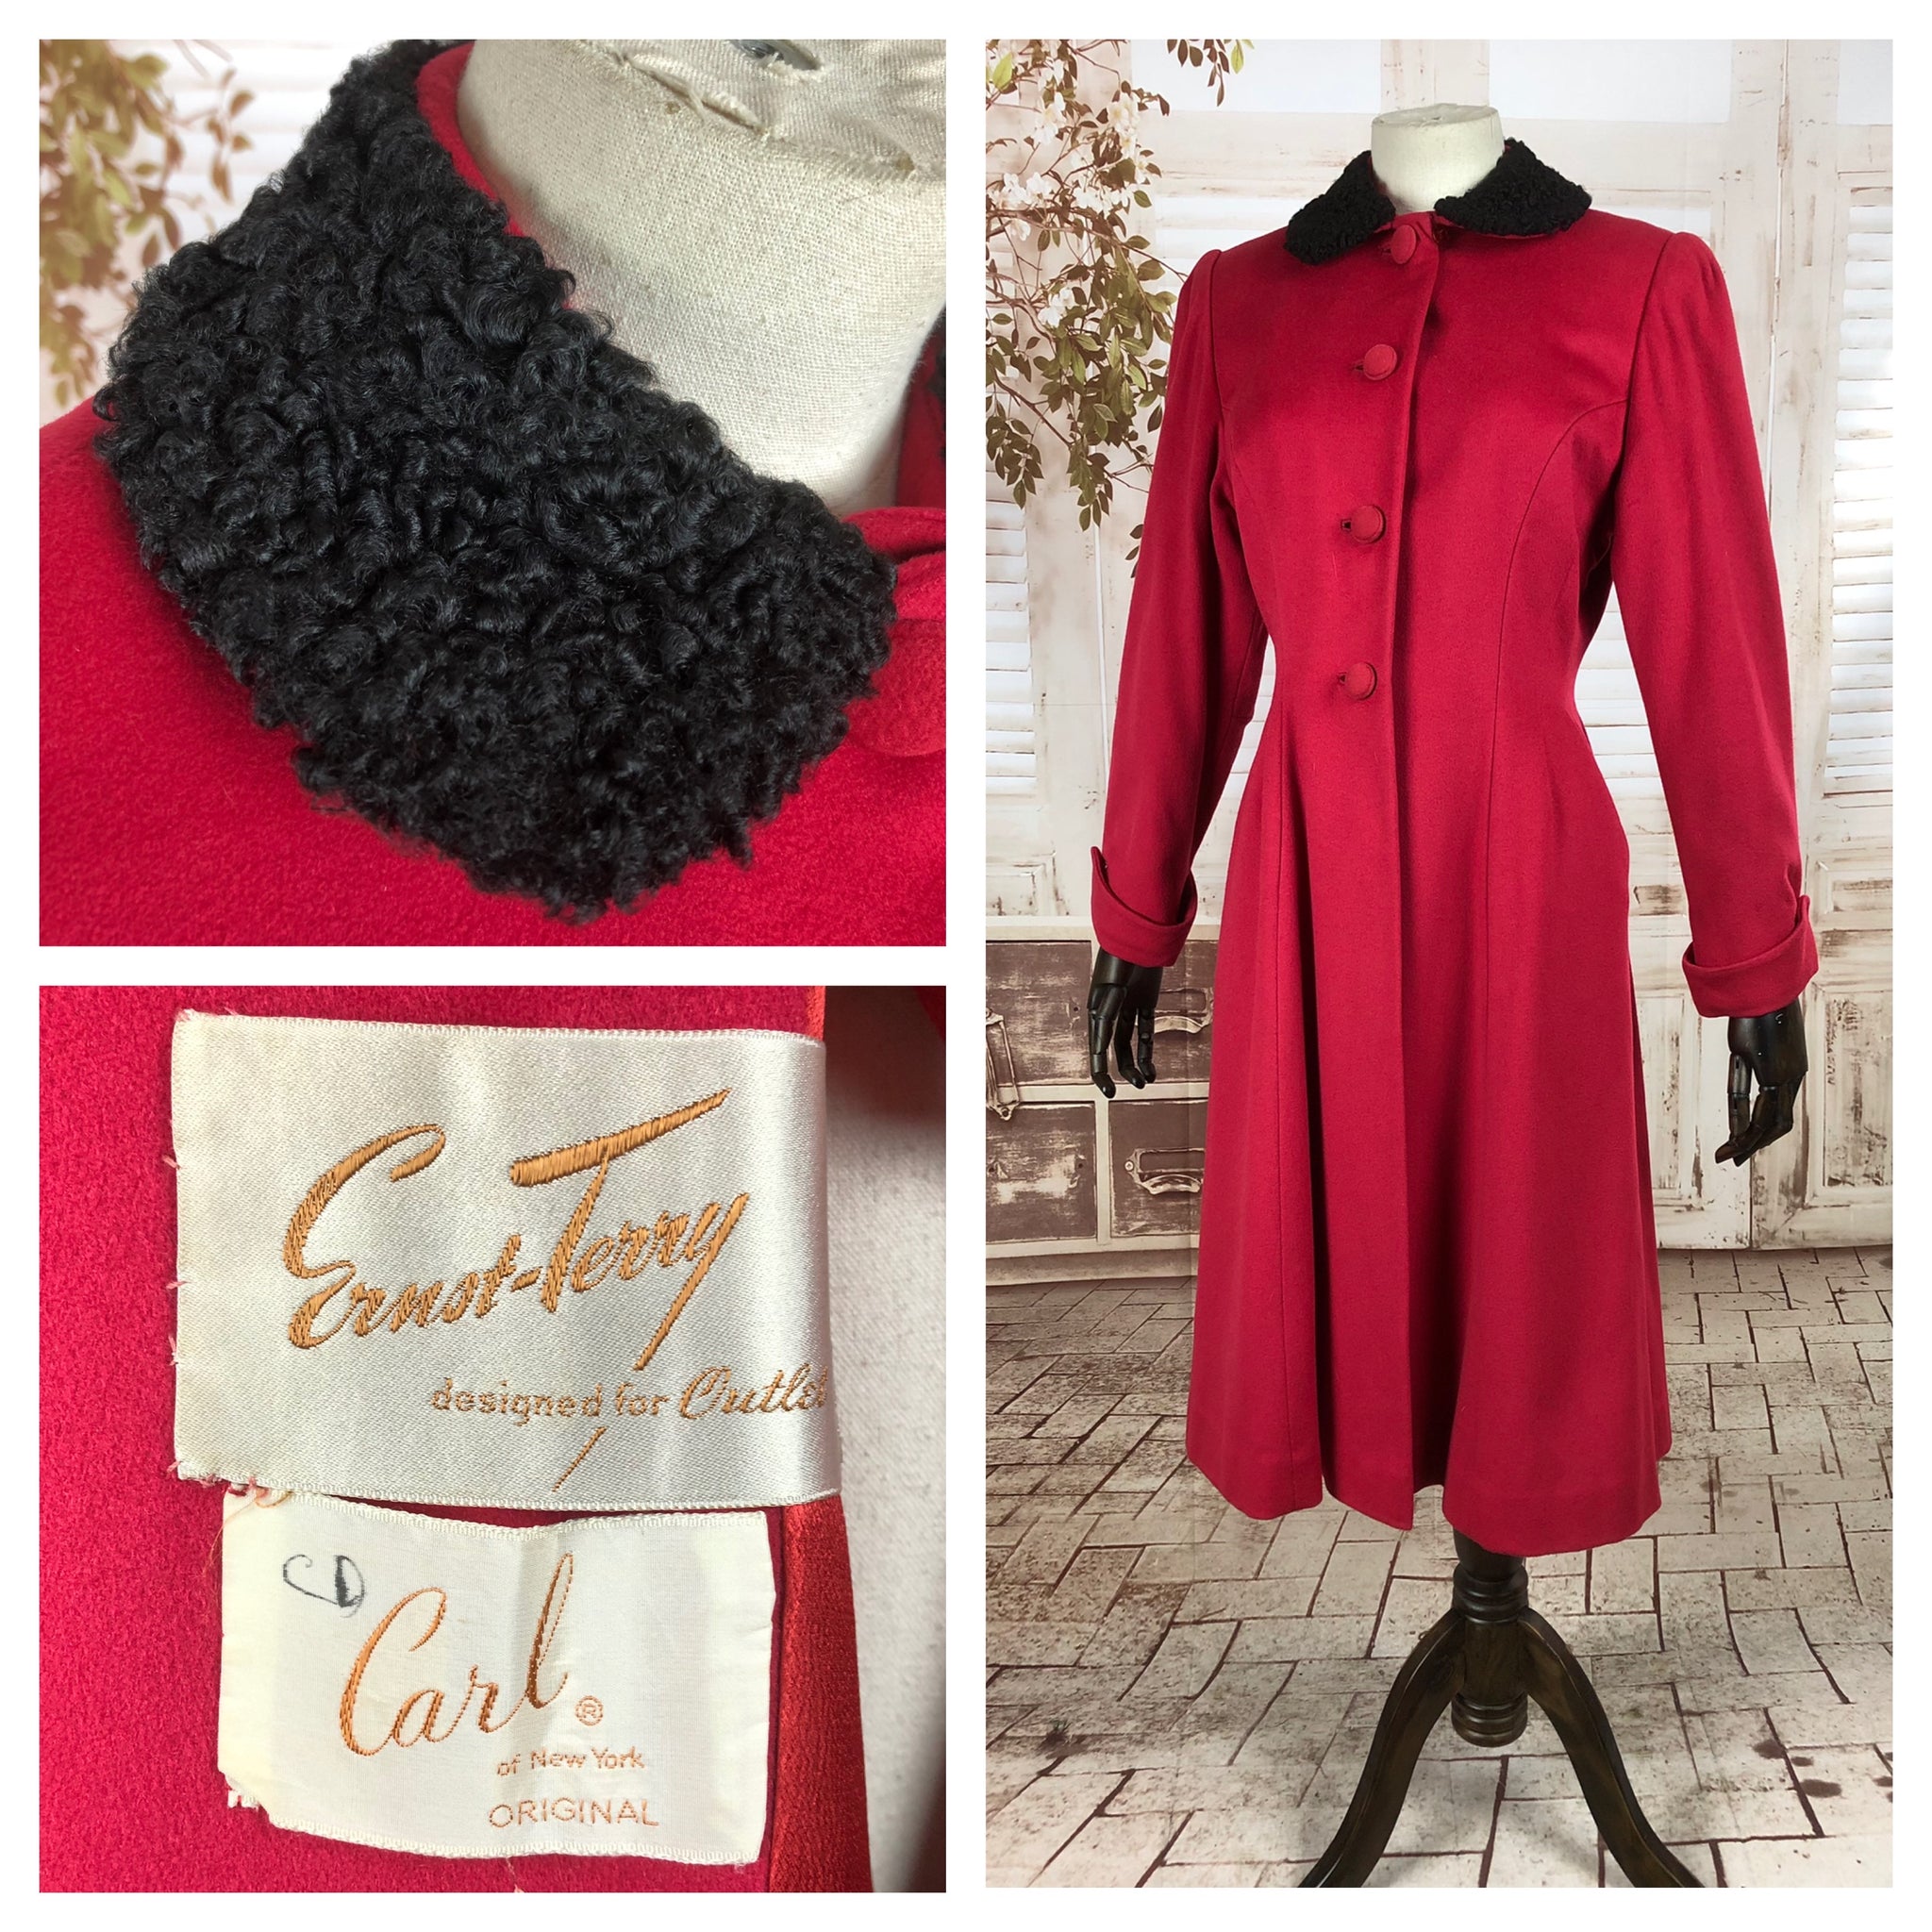 Original 1940s 40s Vintage Red Princess Coat With Astrakhan Collar By Carl New York